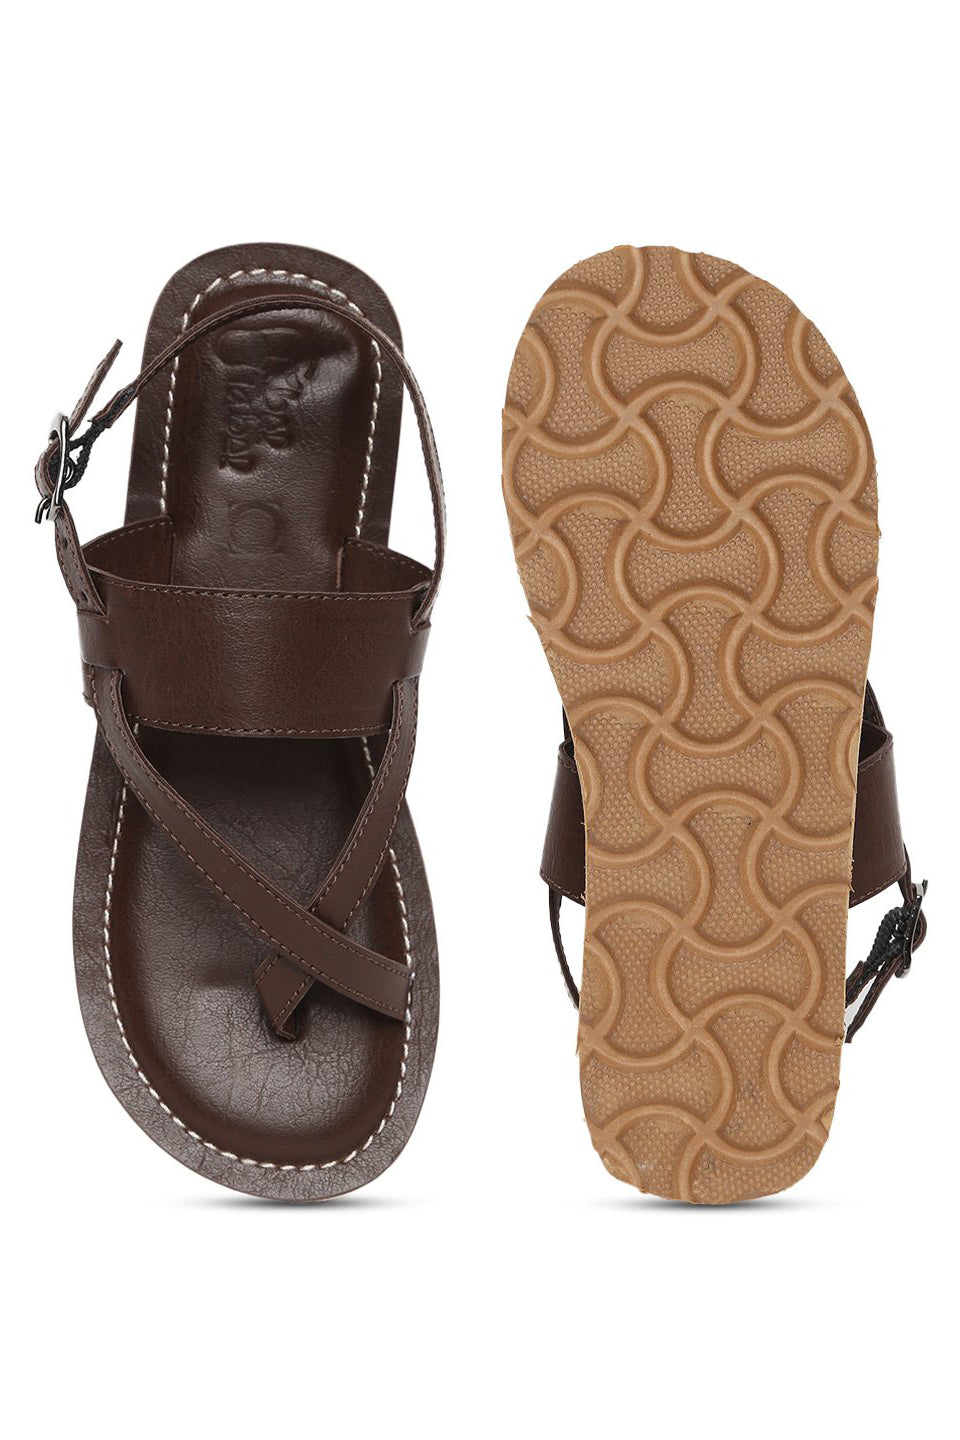 Trotter Brown Leather Sandals - Buy Trotter Brown Leather Sandals Online at  Best Prices in India on Snapdeal